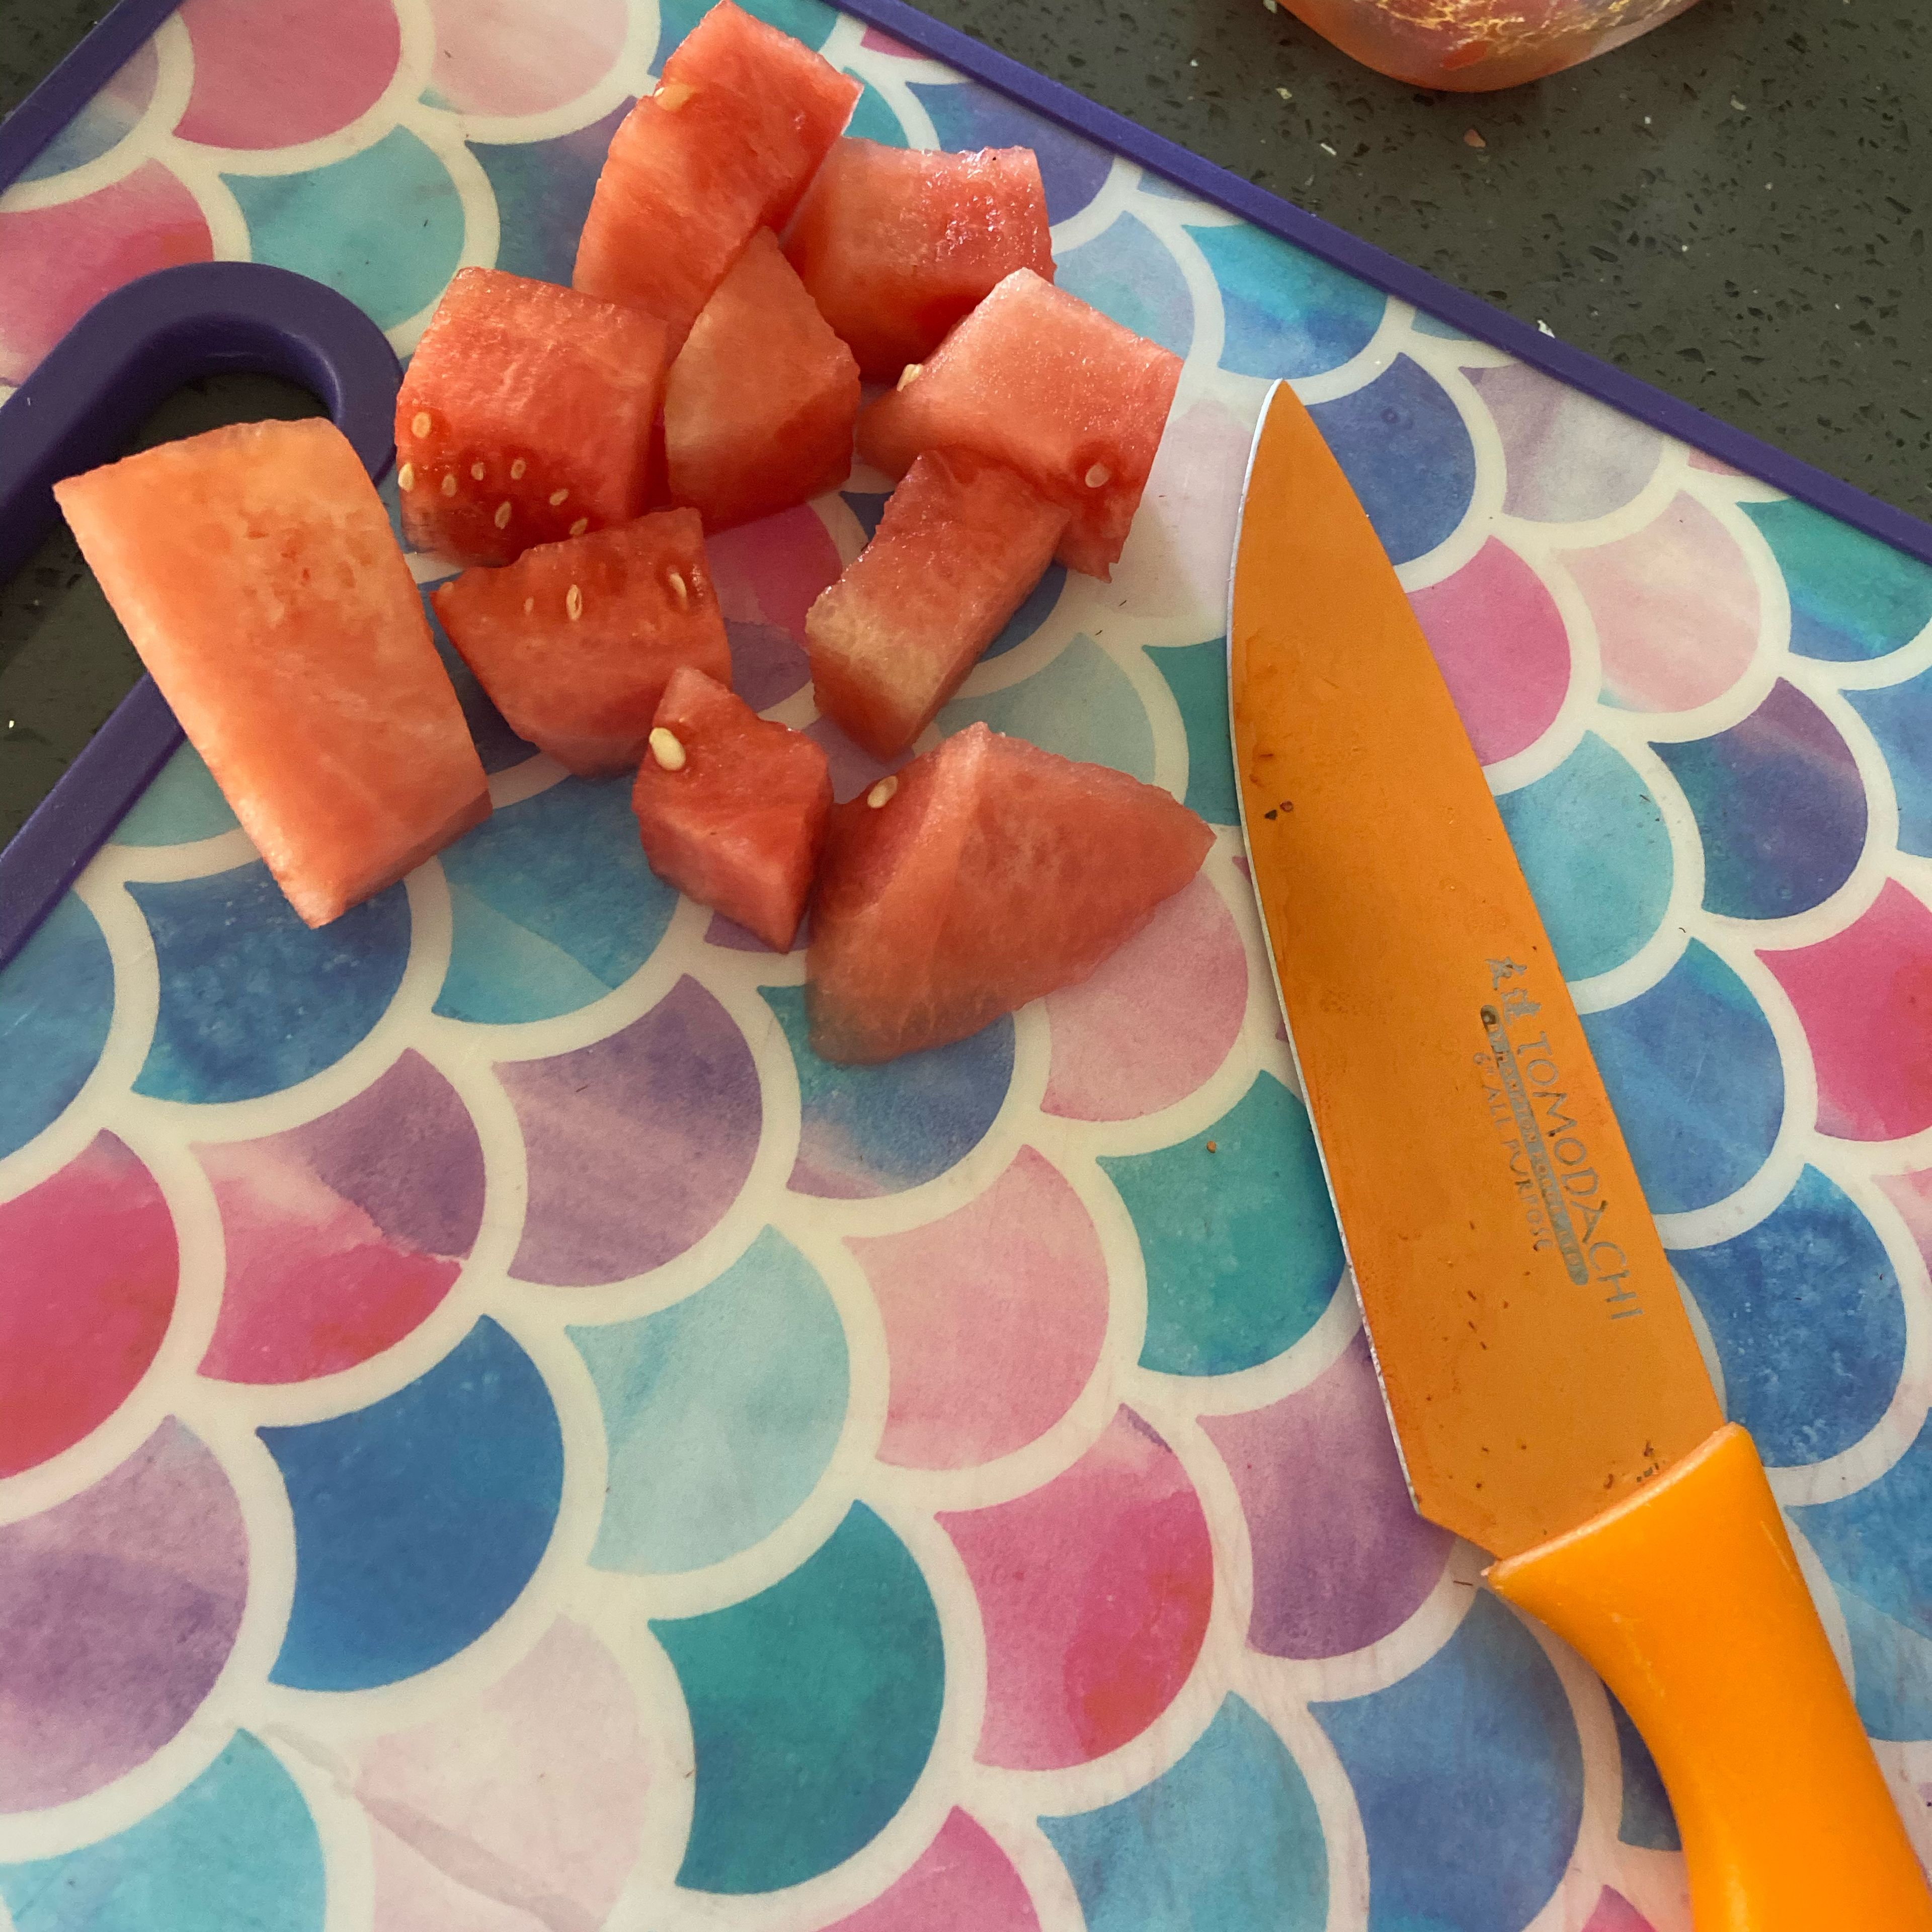 Cut up the watermelon